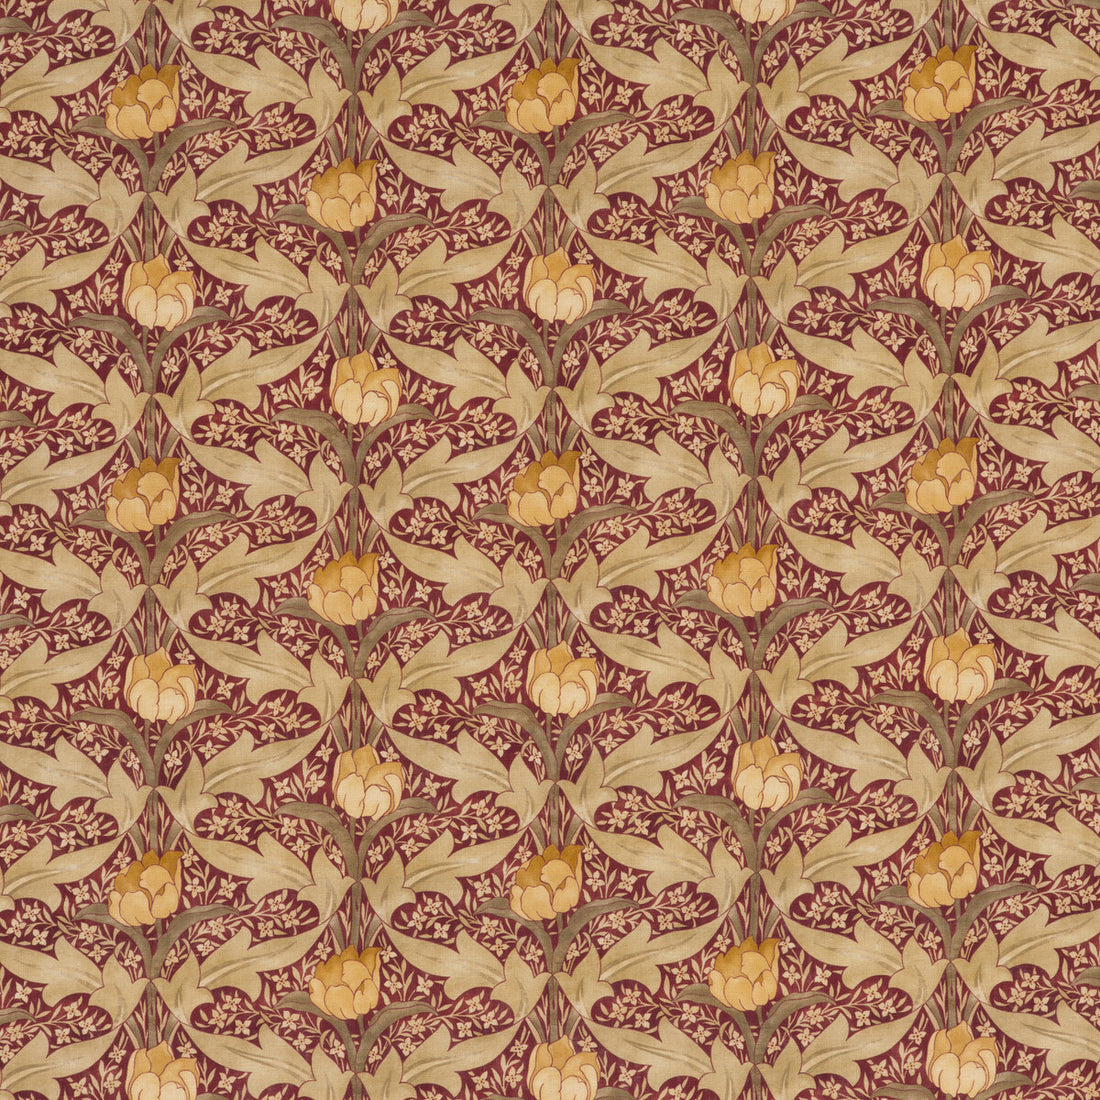 Tulip &amp; Jasmine fabric in red/ochre color - pattern BP10622.2.0 - by G P &amp; J Baker in the Originals V collection